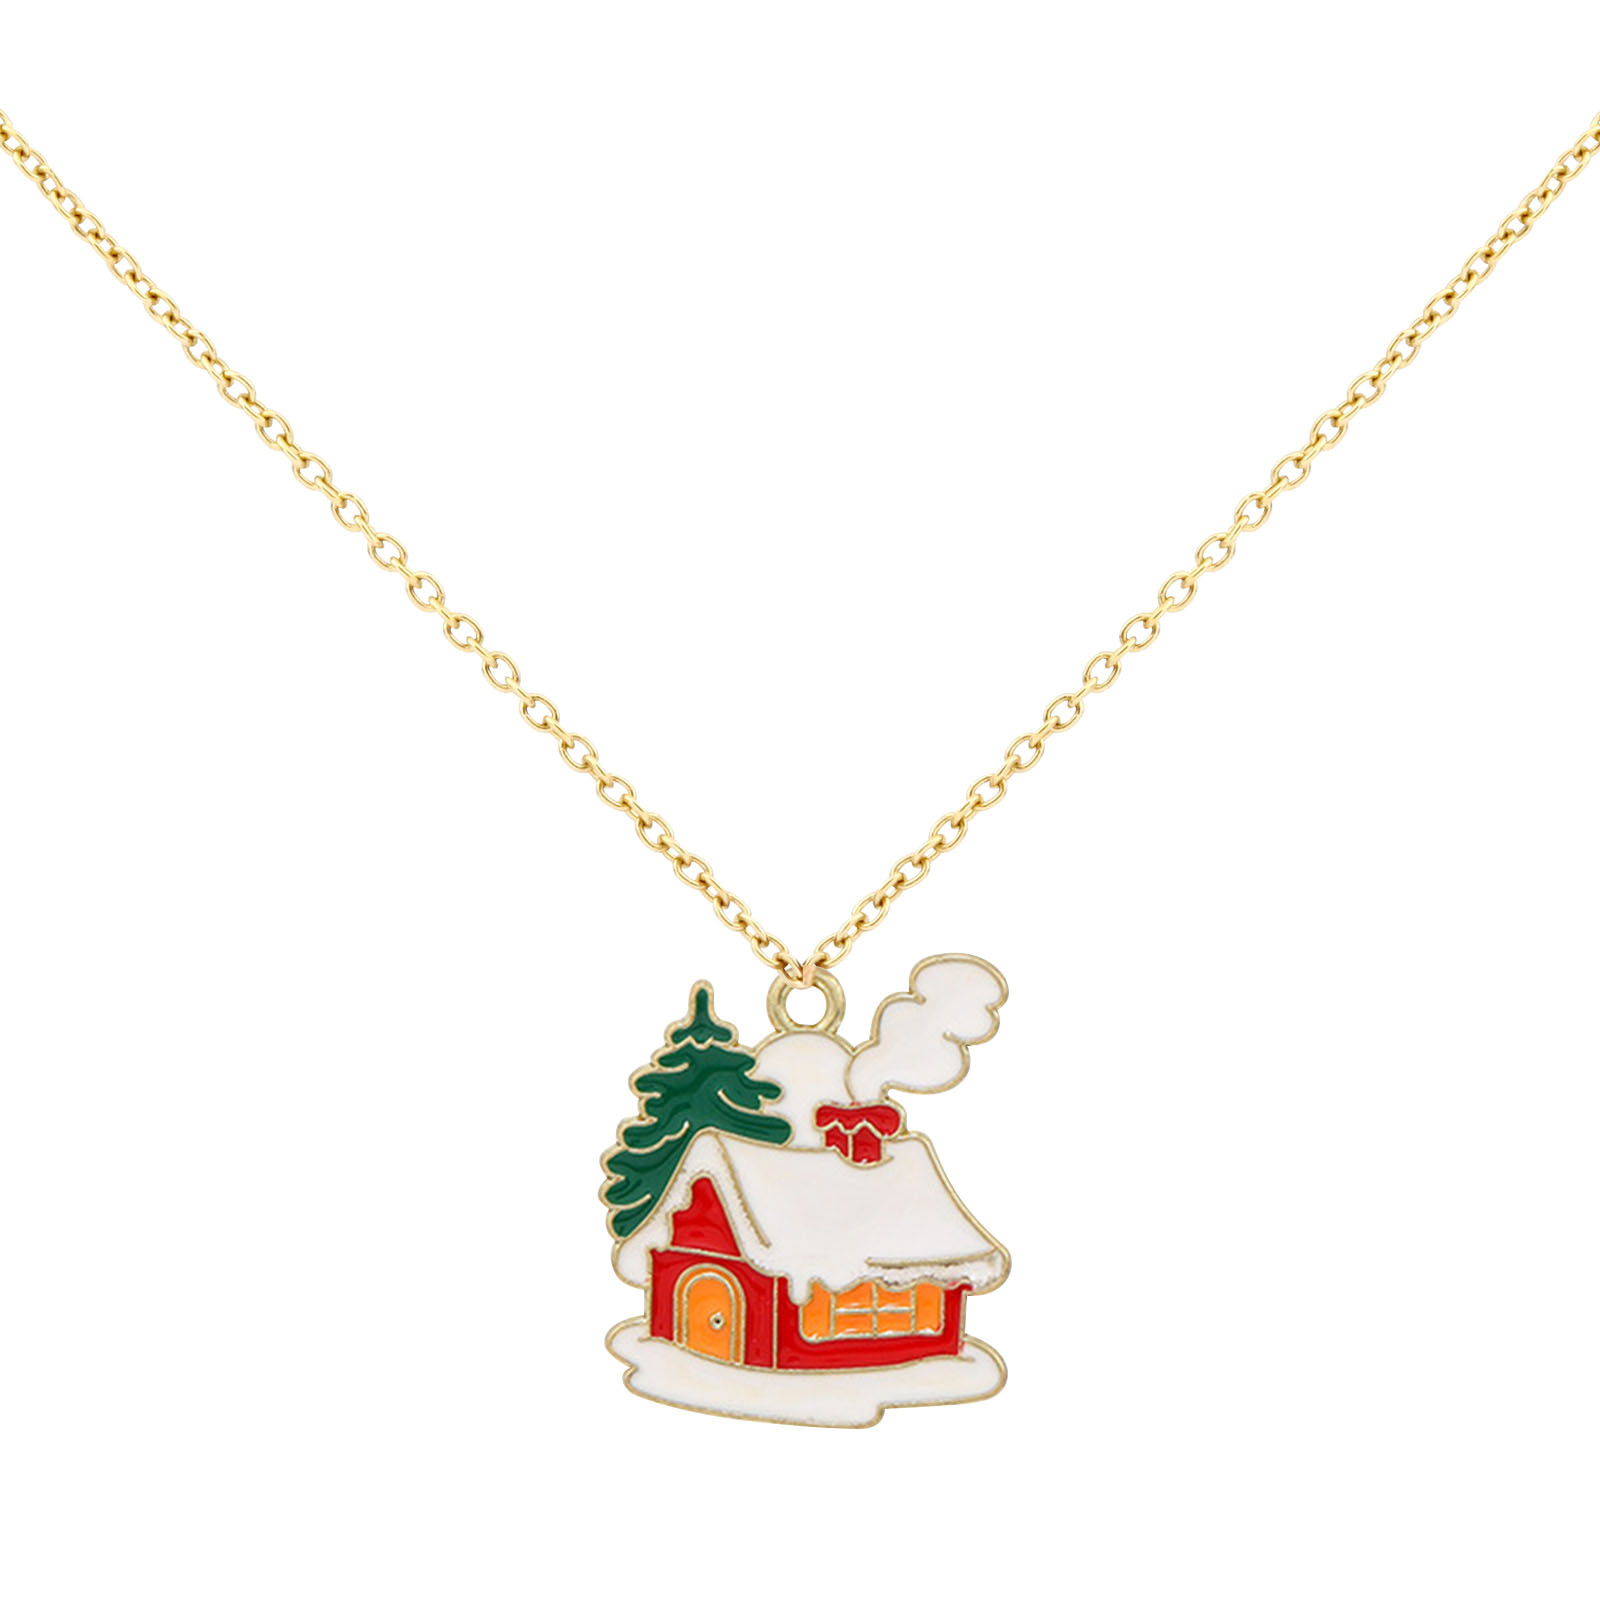 Kayannuo Christmas Clearance Ladies Christmas Necklace Christmas Hat Pendant Necklace Fashion Jewelry For Ladies Girls Christmas Gifts - image 2 of 4